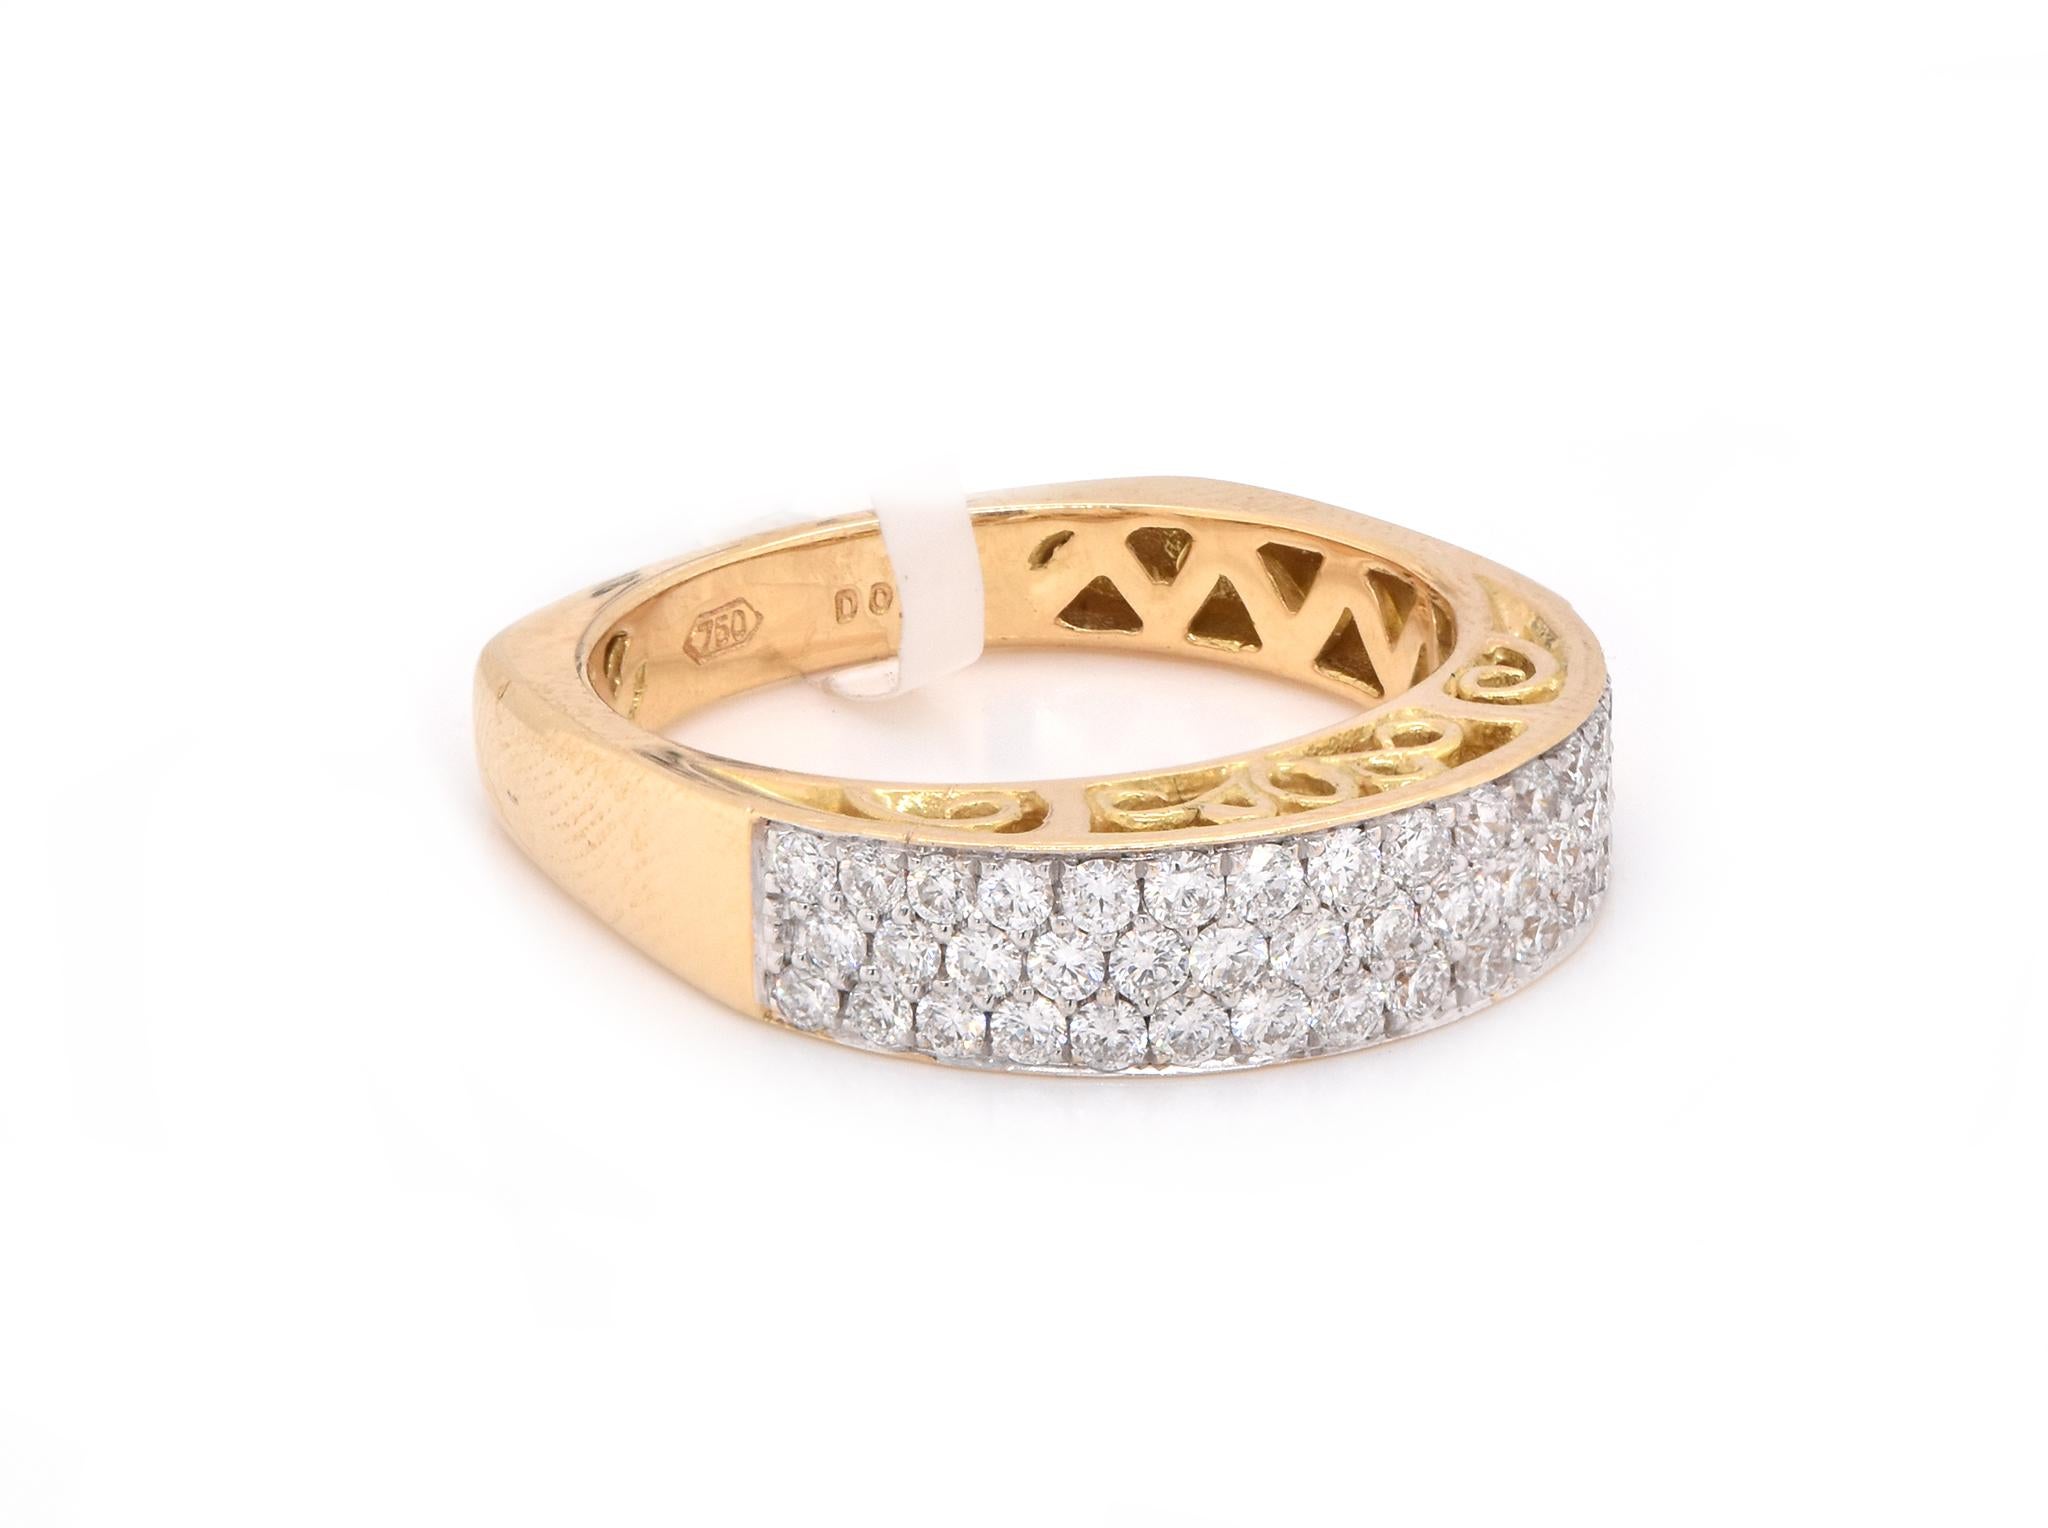 Designer: Custom
Material: 18K yellow gold
Diamonds: 47 round cut = .63cttw
Color: G
Clarity: VS
Size: 7
Dimensions: ring measures 5mm in width
Weight: 5.79 grams
